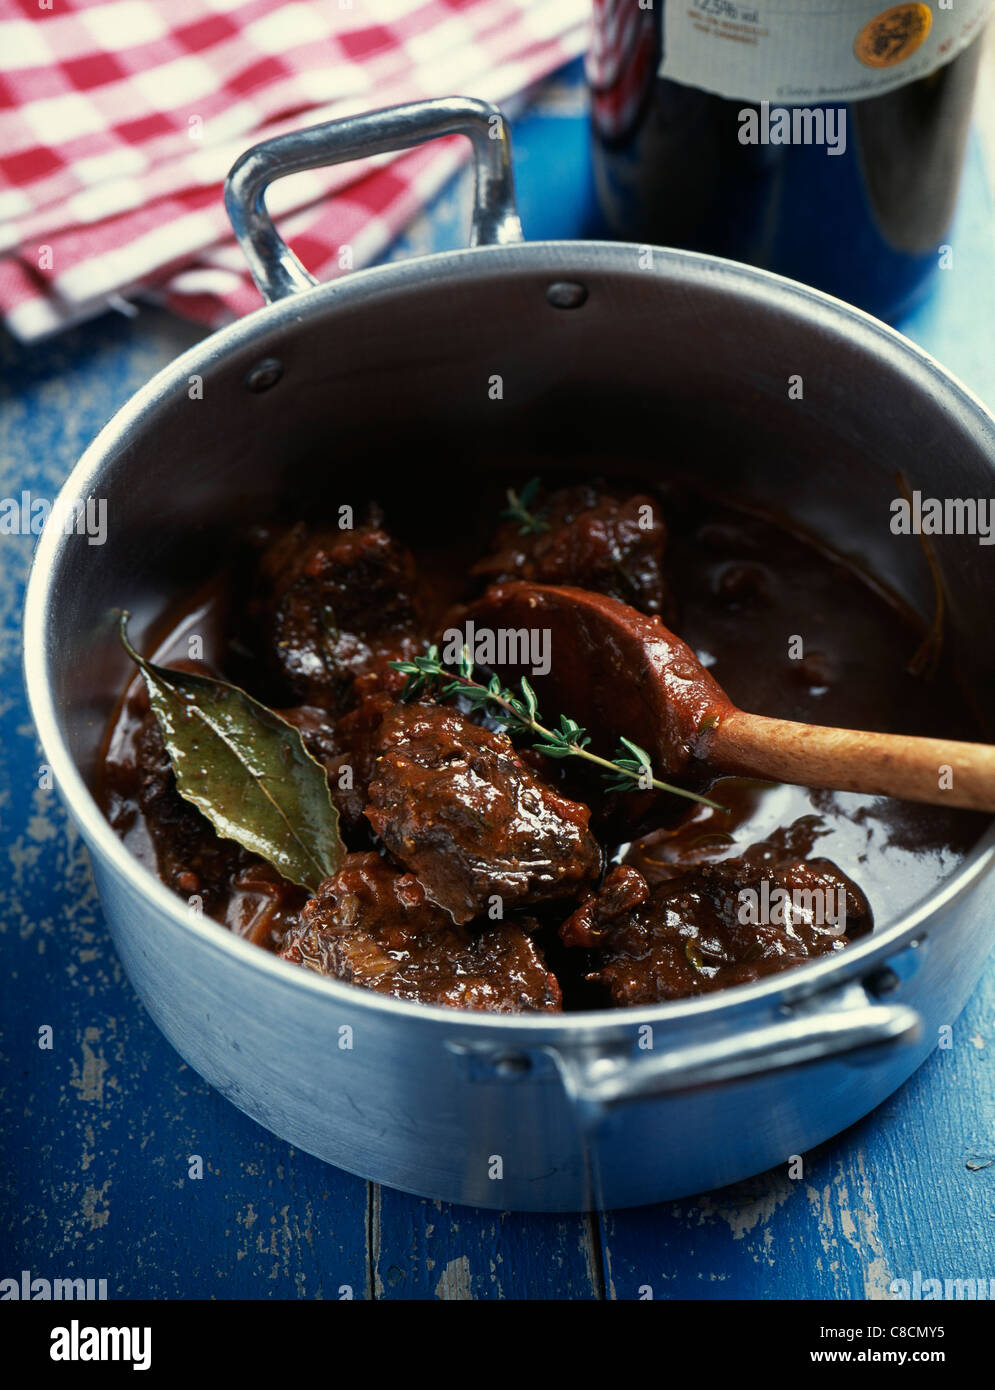 Beef sauté with red wine sauce Stock Photo